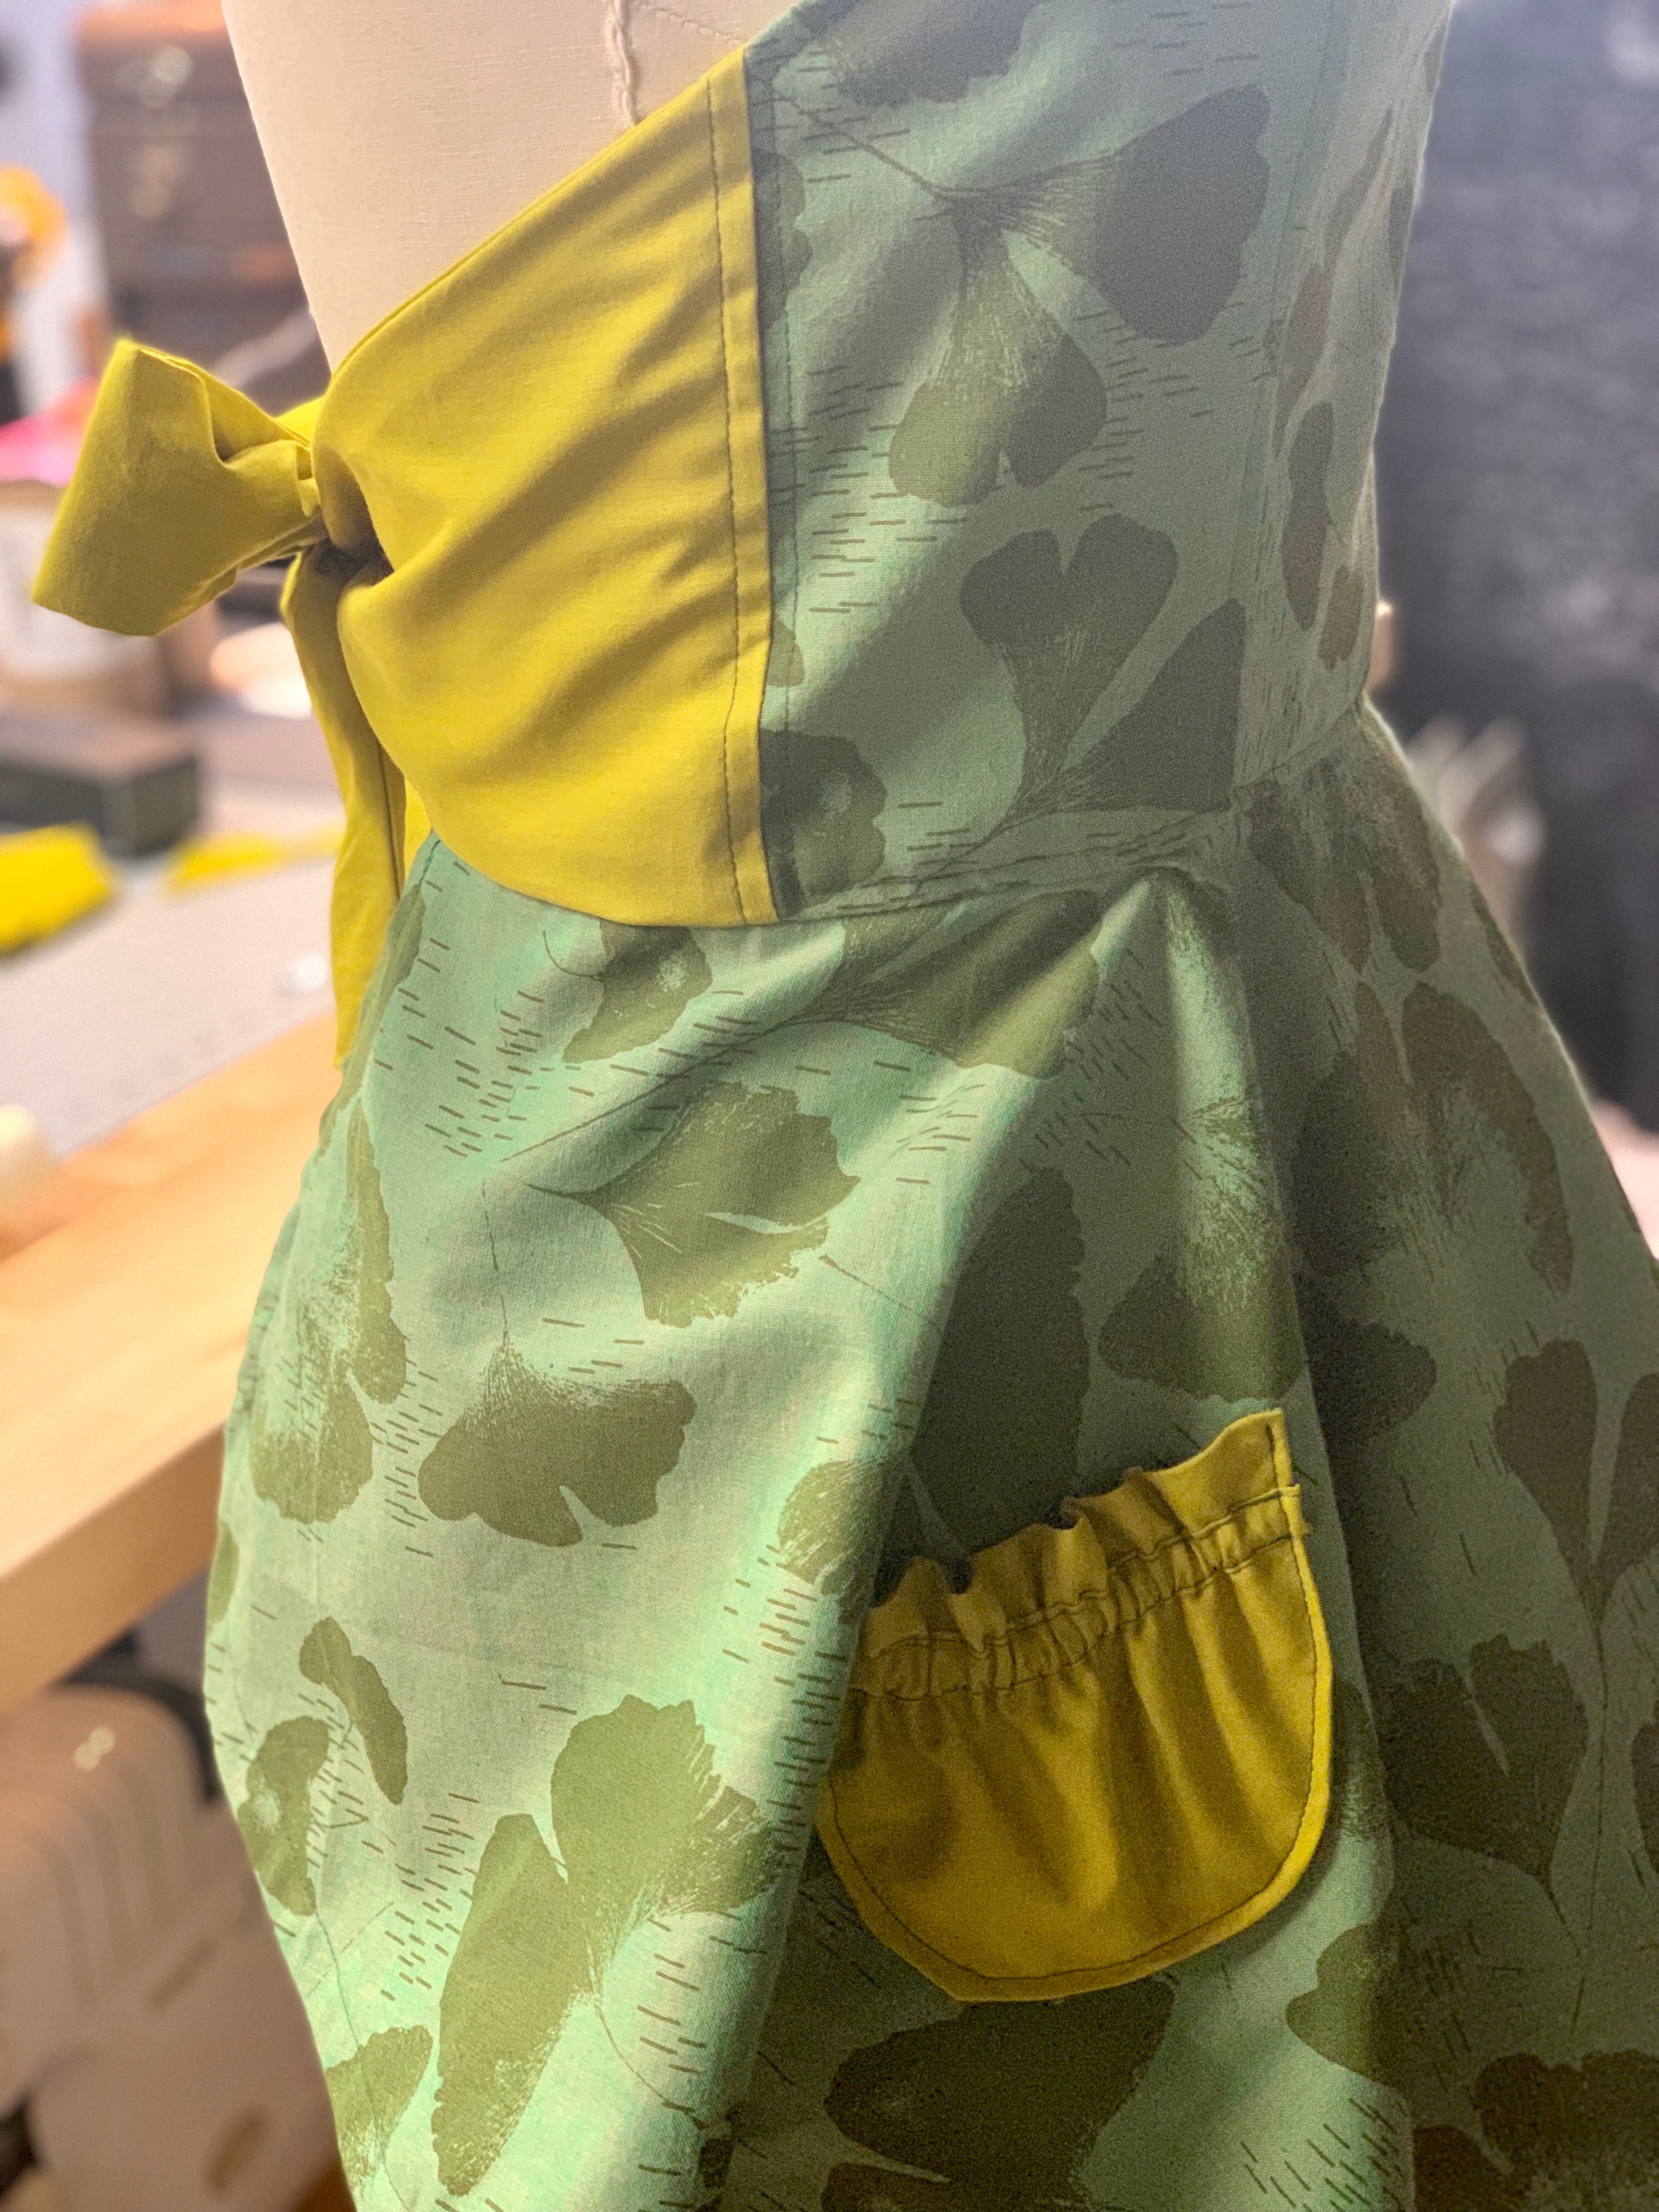 A rear view of the apron, featuring a ginkgo leaf motif in shades of green